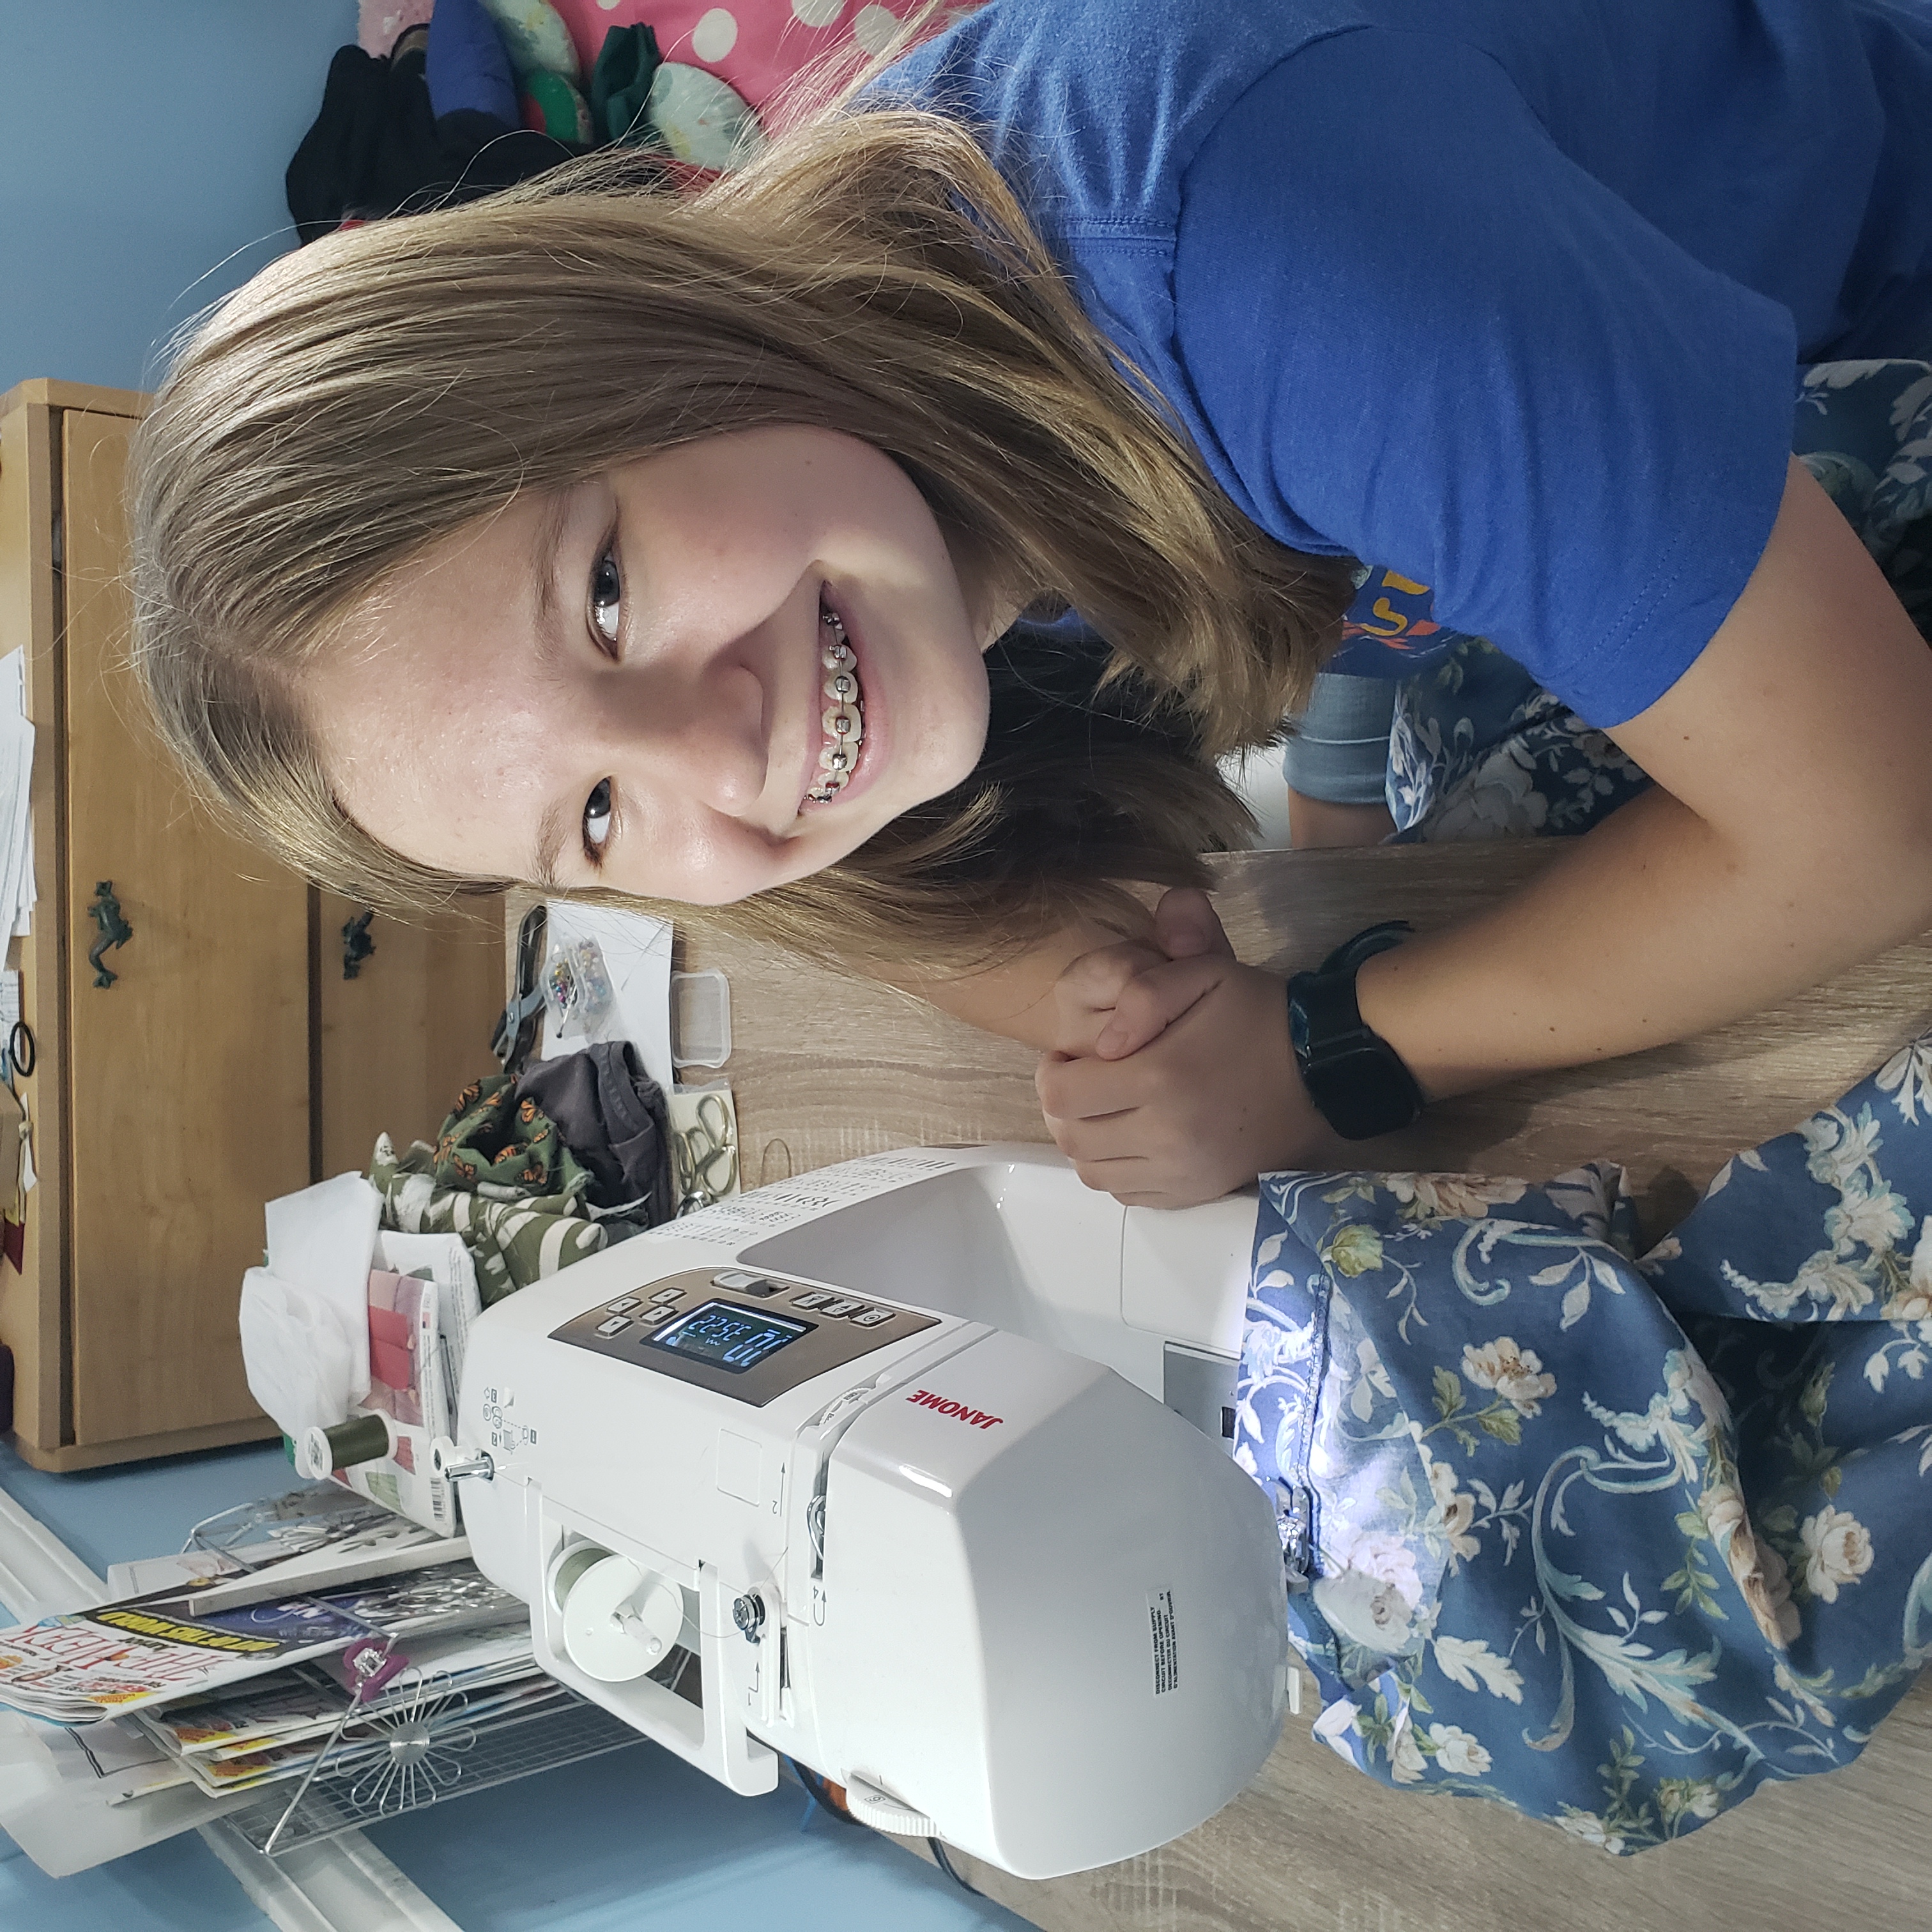 4-H youth grins at camera while sewing a green dress.